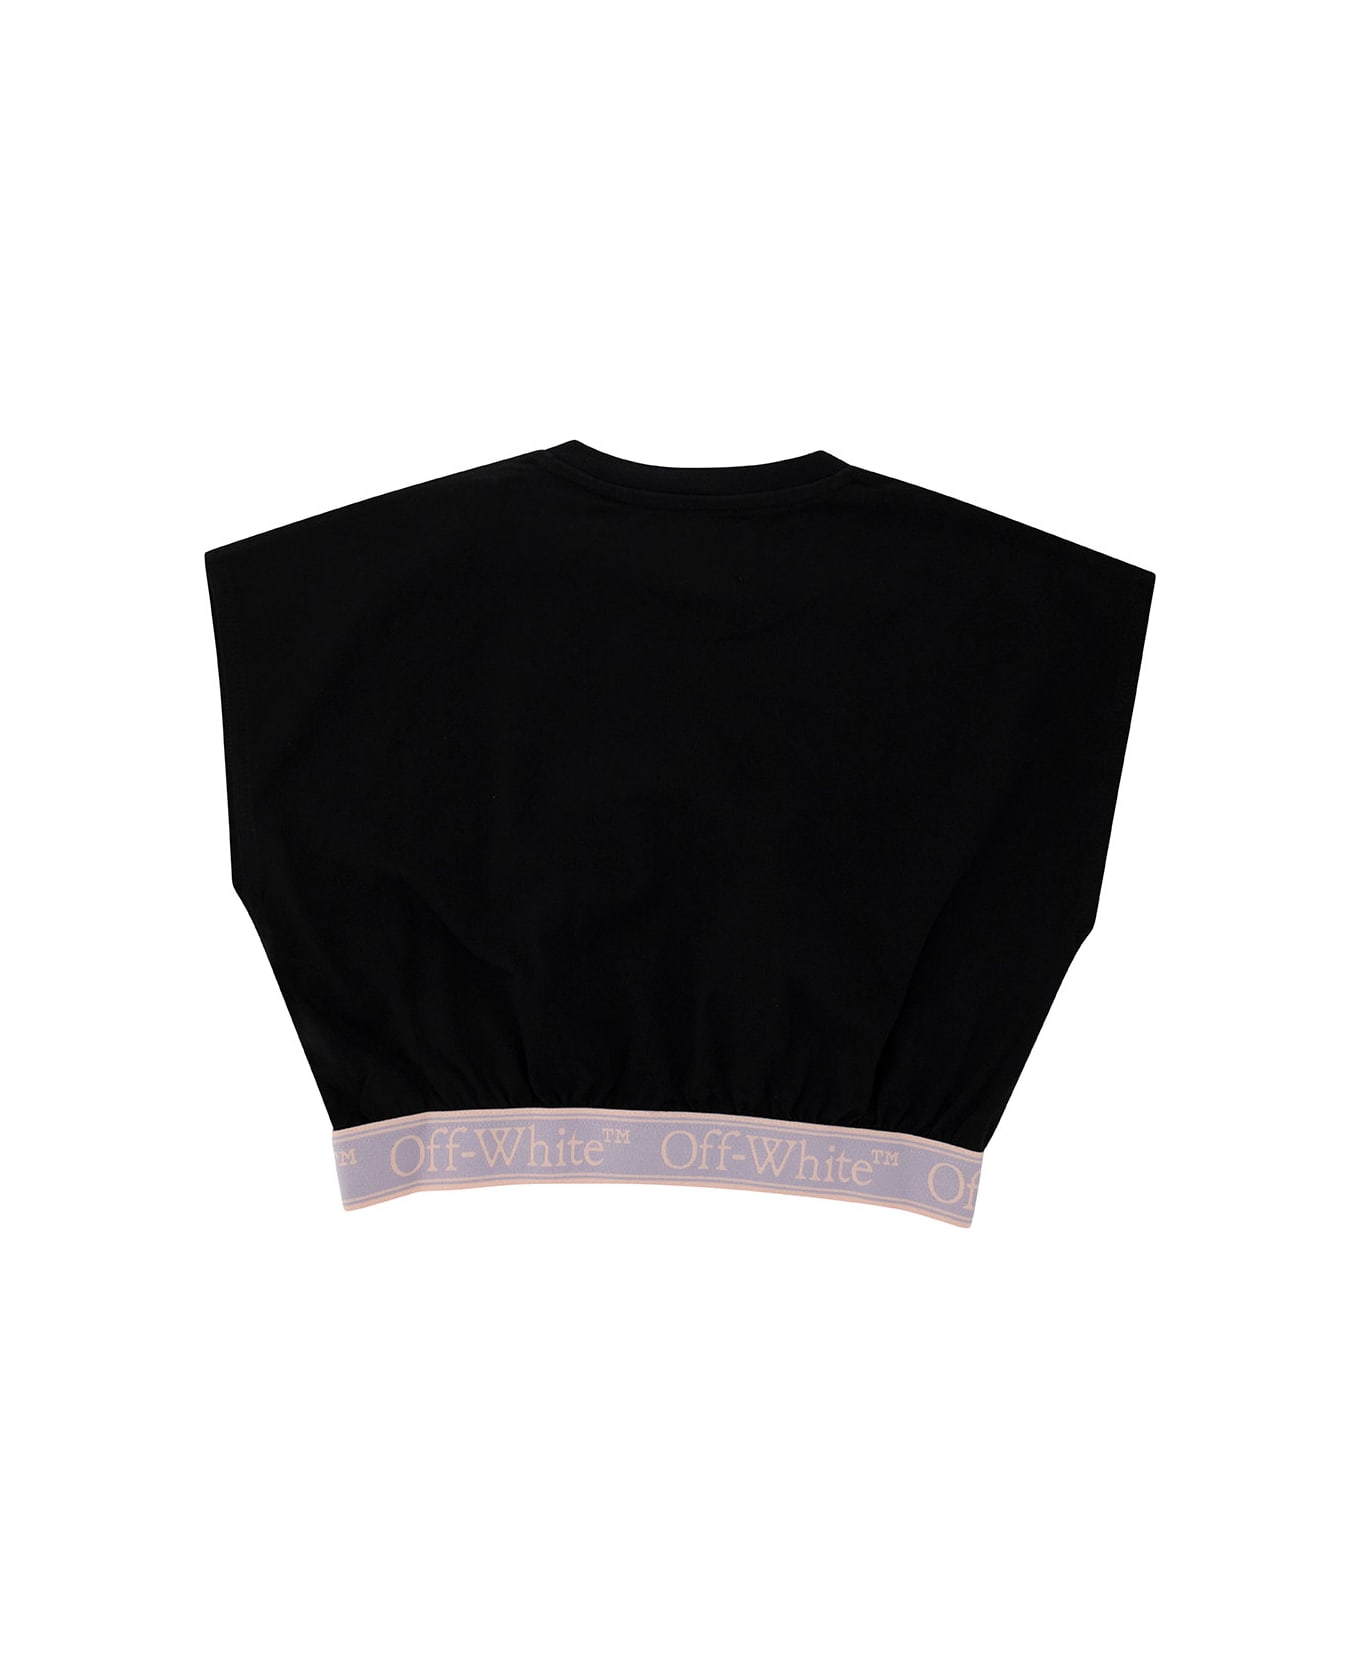 Off-White Black Crop Top With Branded Band In Cotton Girl - Black トップス